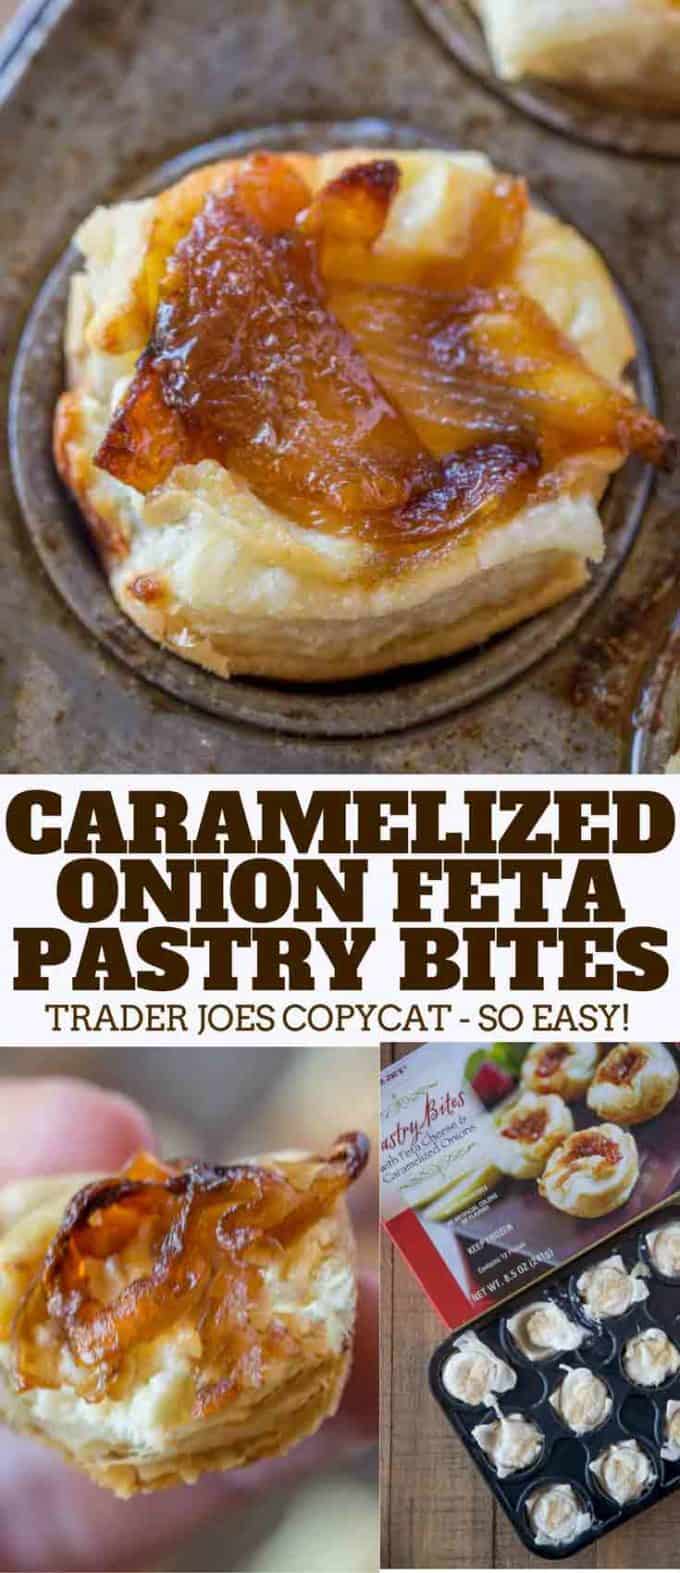 Caramelized Onion Feta Pastry Bites from Trader Joe's are one of their most popular frozen appetizers (and most expensive) and they're easy to make at home!